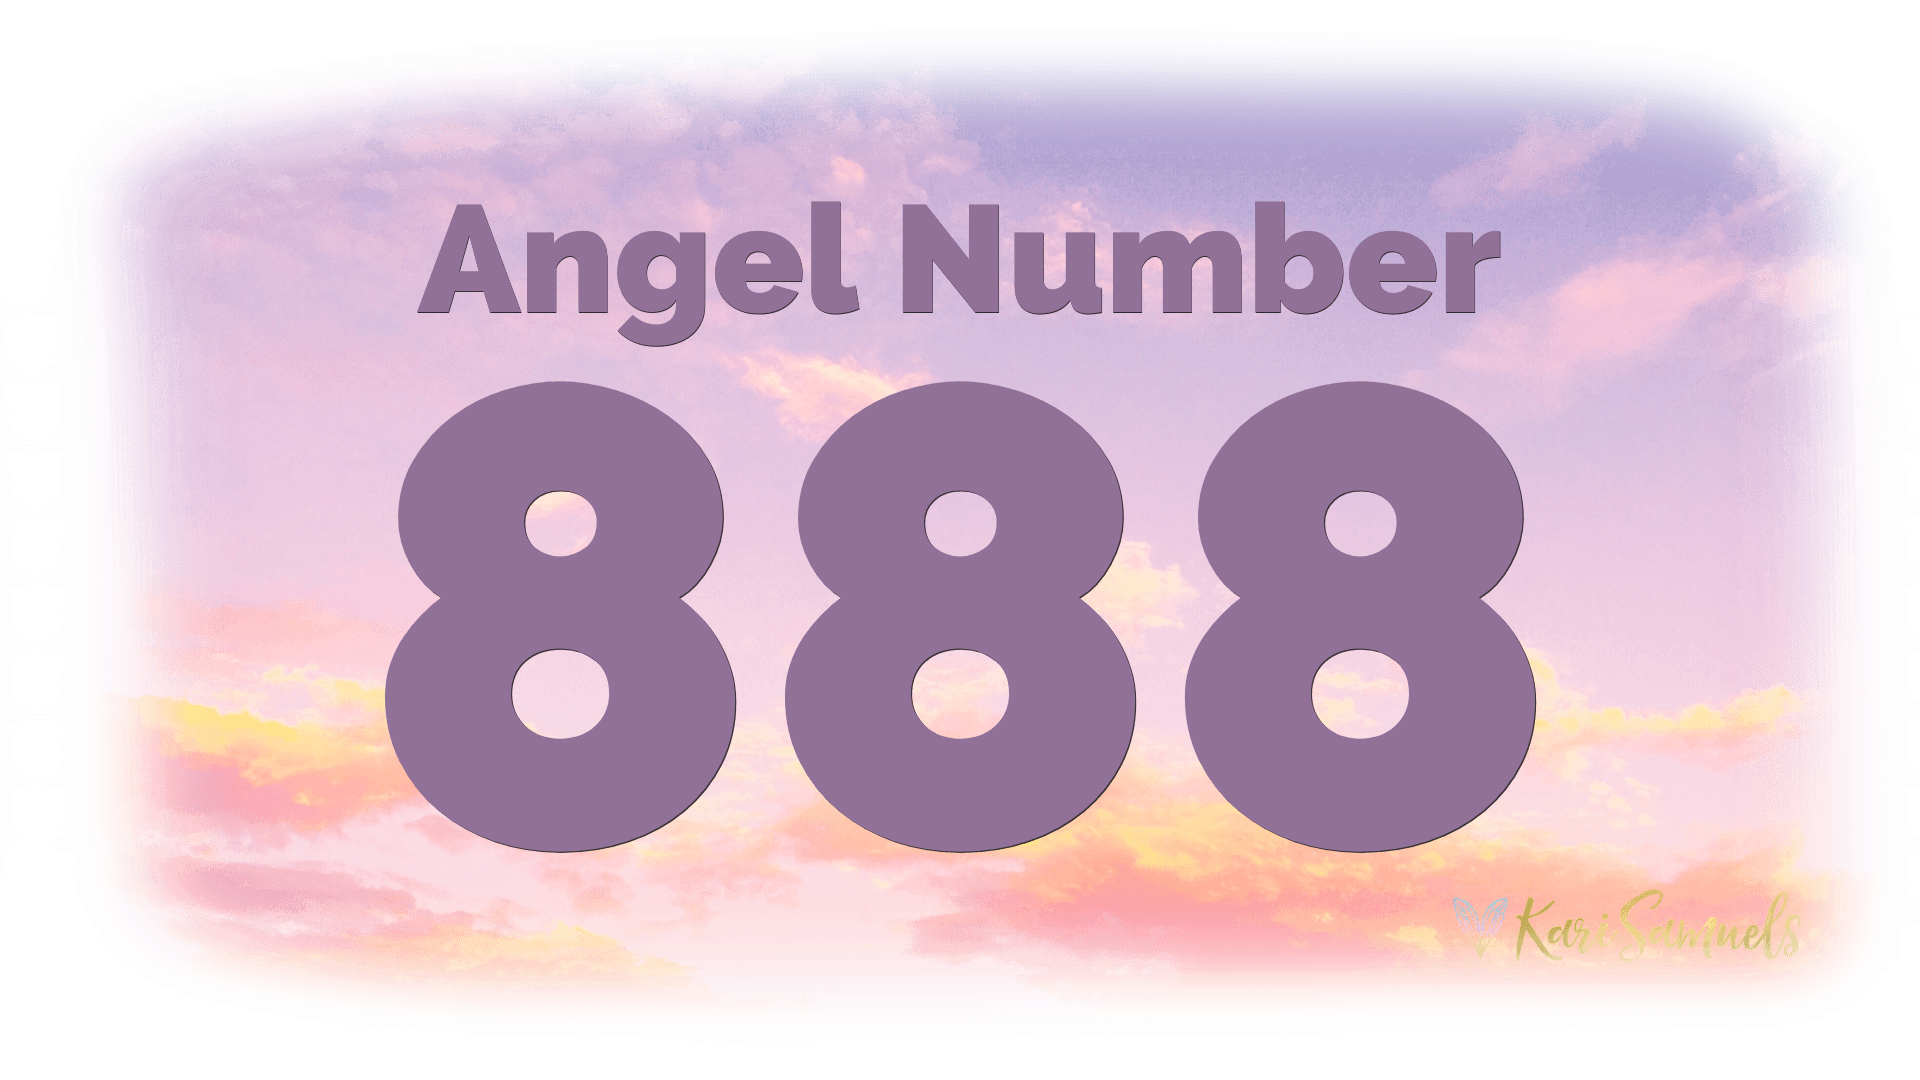 Angel number 888 with purple sunset colors in the back.